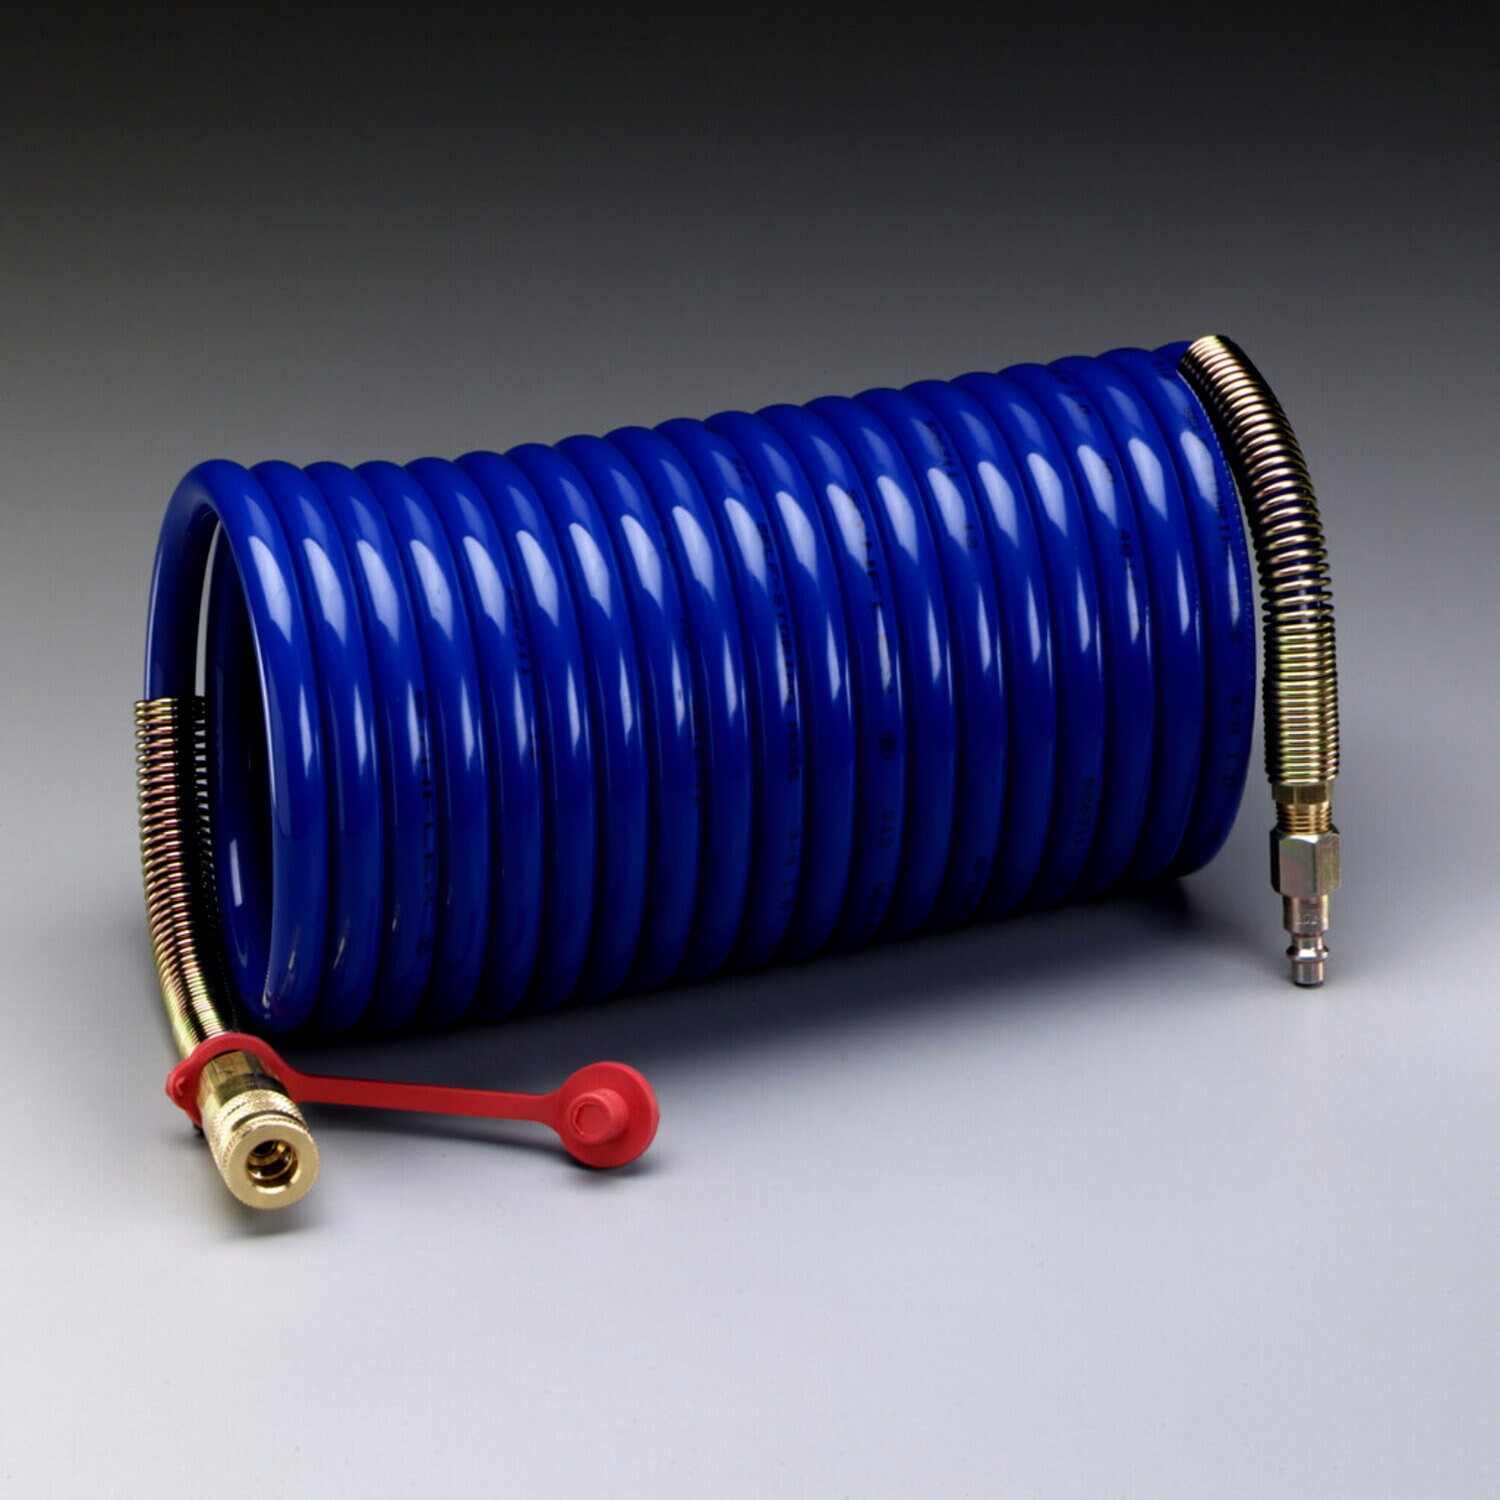 7000005414 - 3M Supplied Air Hose W-2929-50, 50 ft, 3/8 in ID, Industrial
Interchange Fittings, High Pressure, Coiled, 1 EA/Case